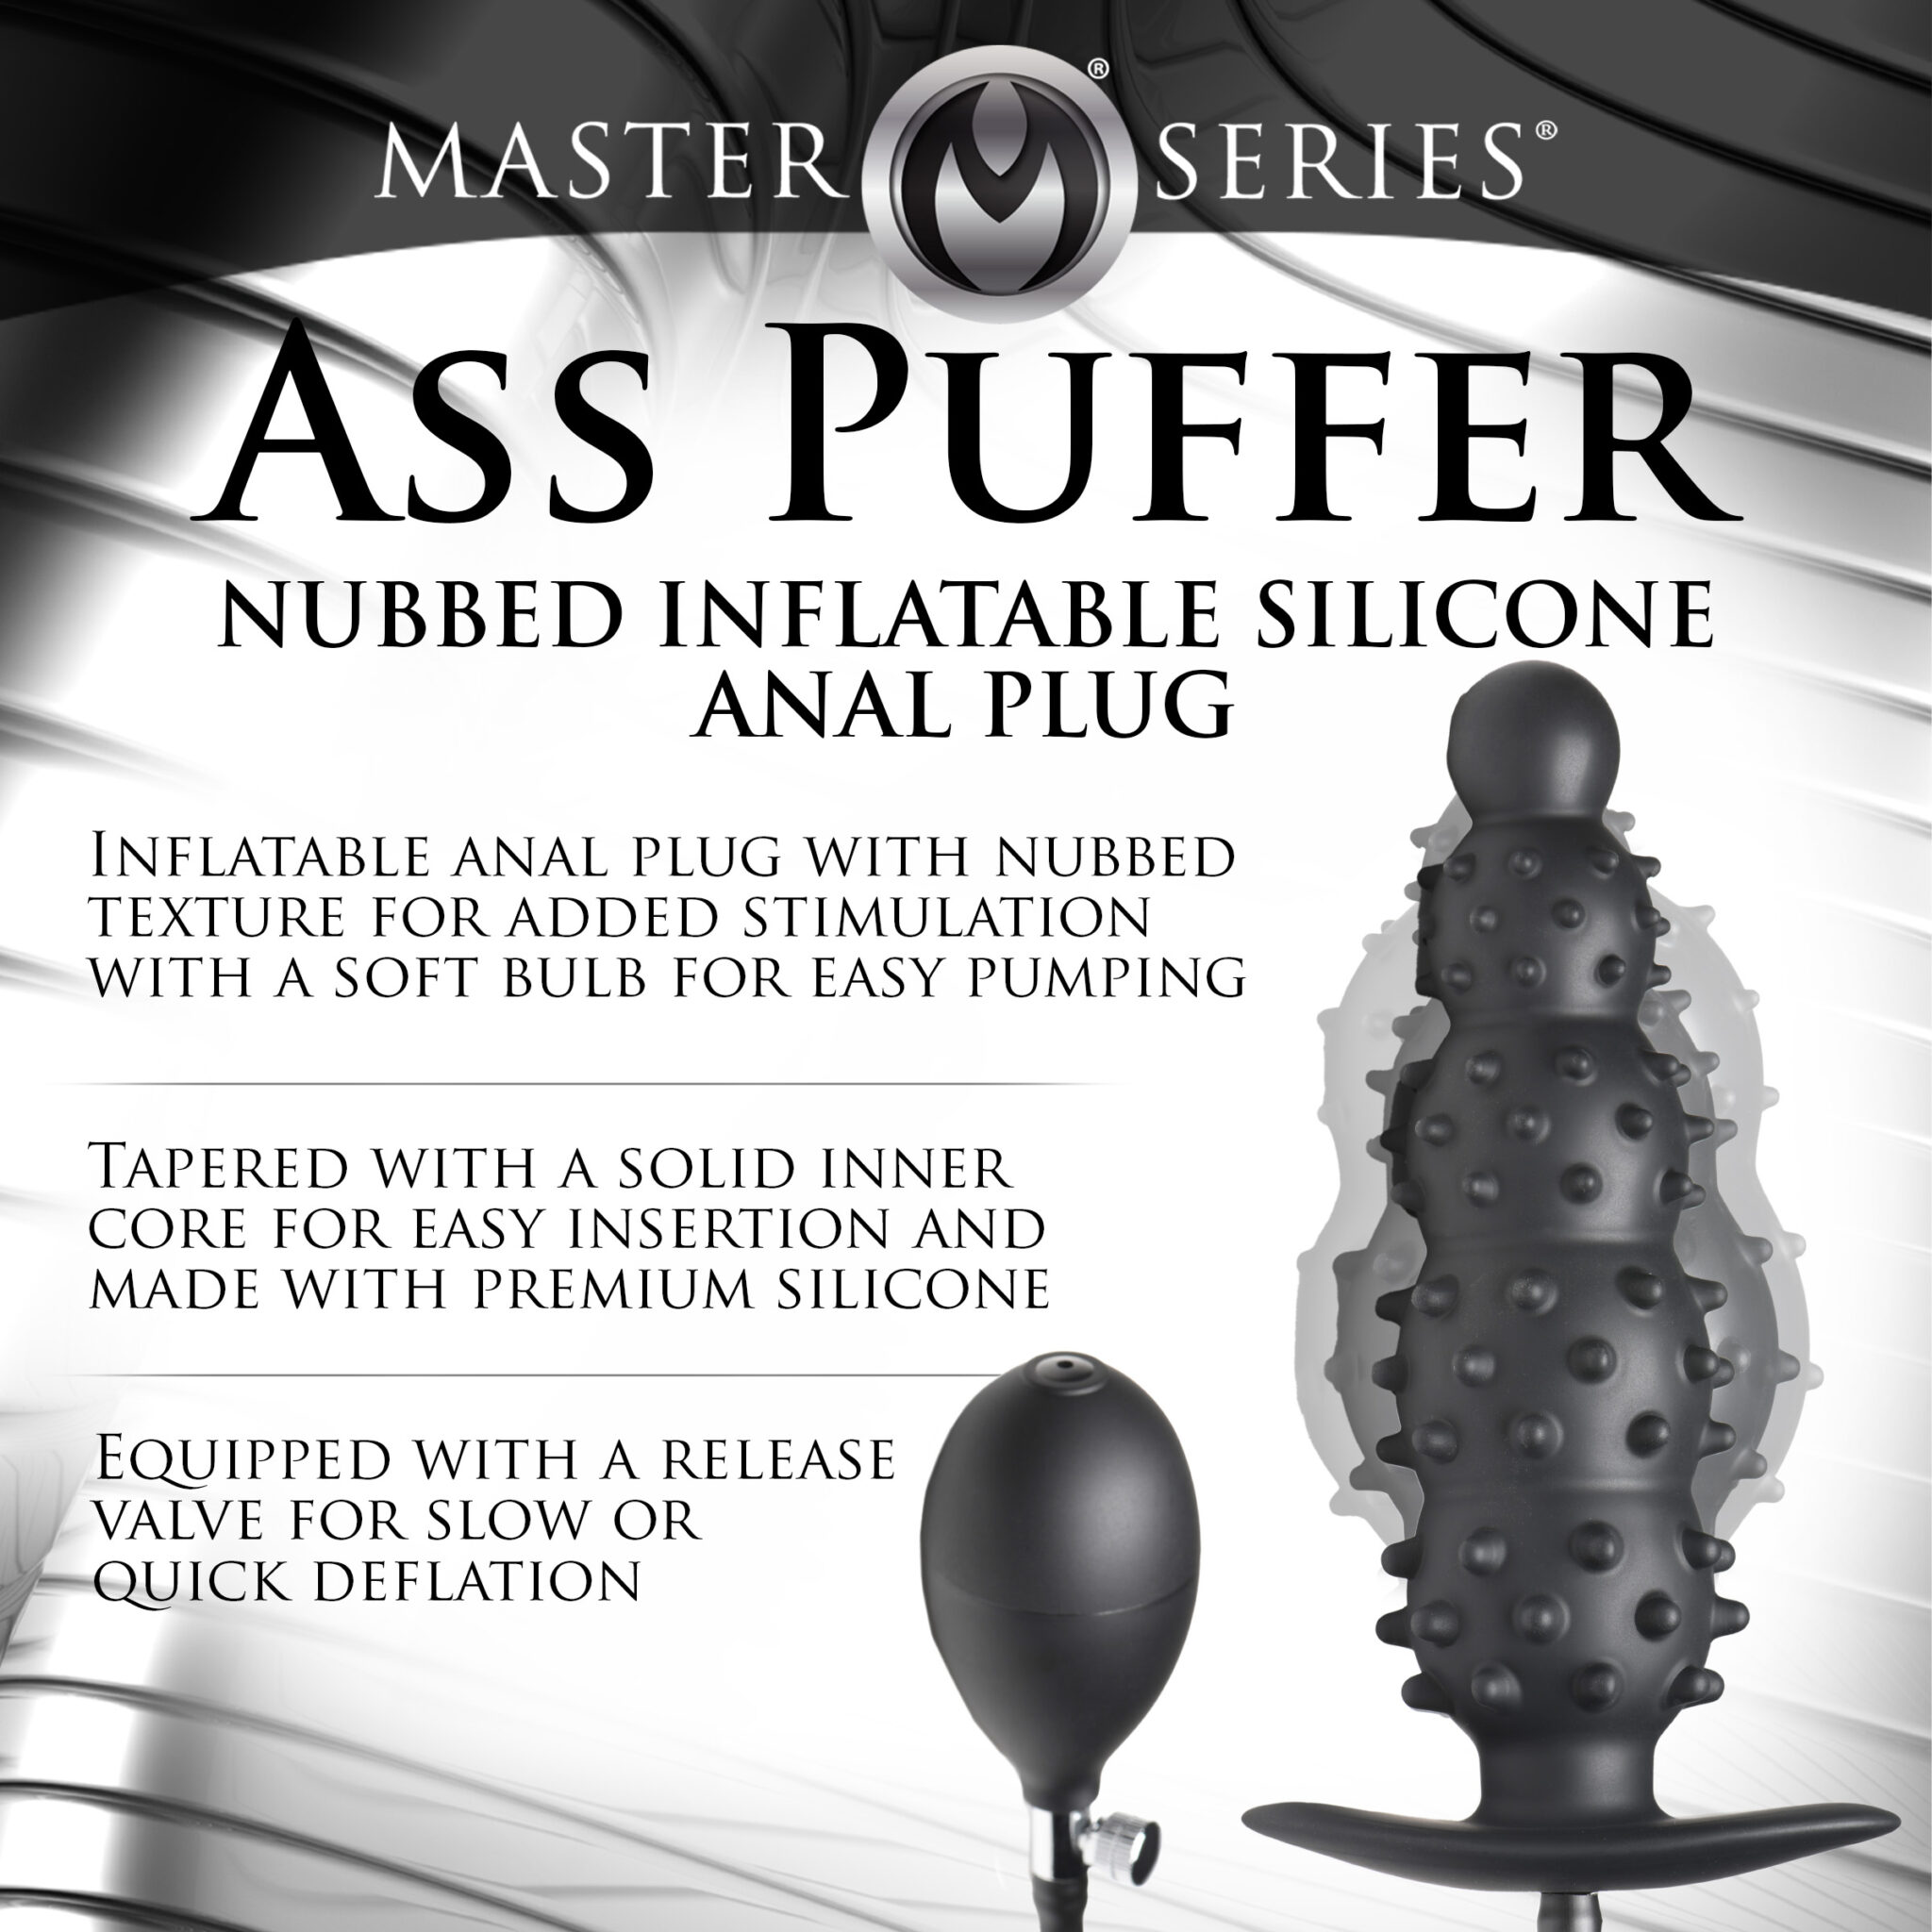 Ass Puffer Nubbed Inflatable Silicone Anal Plug